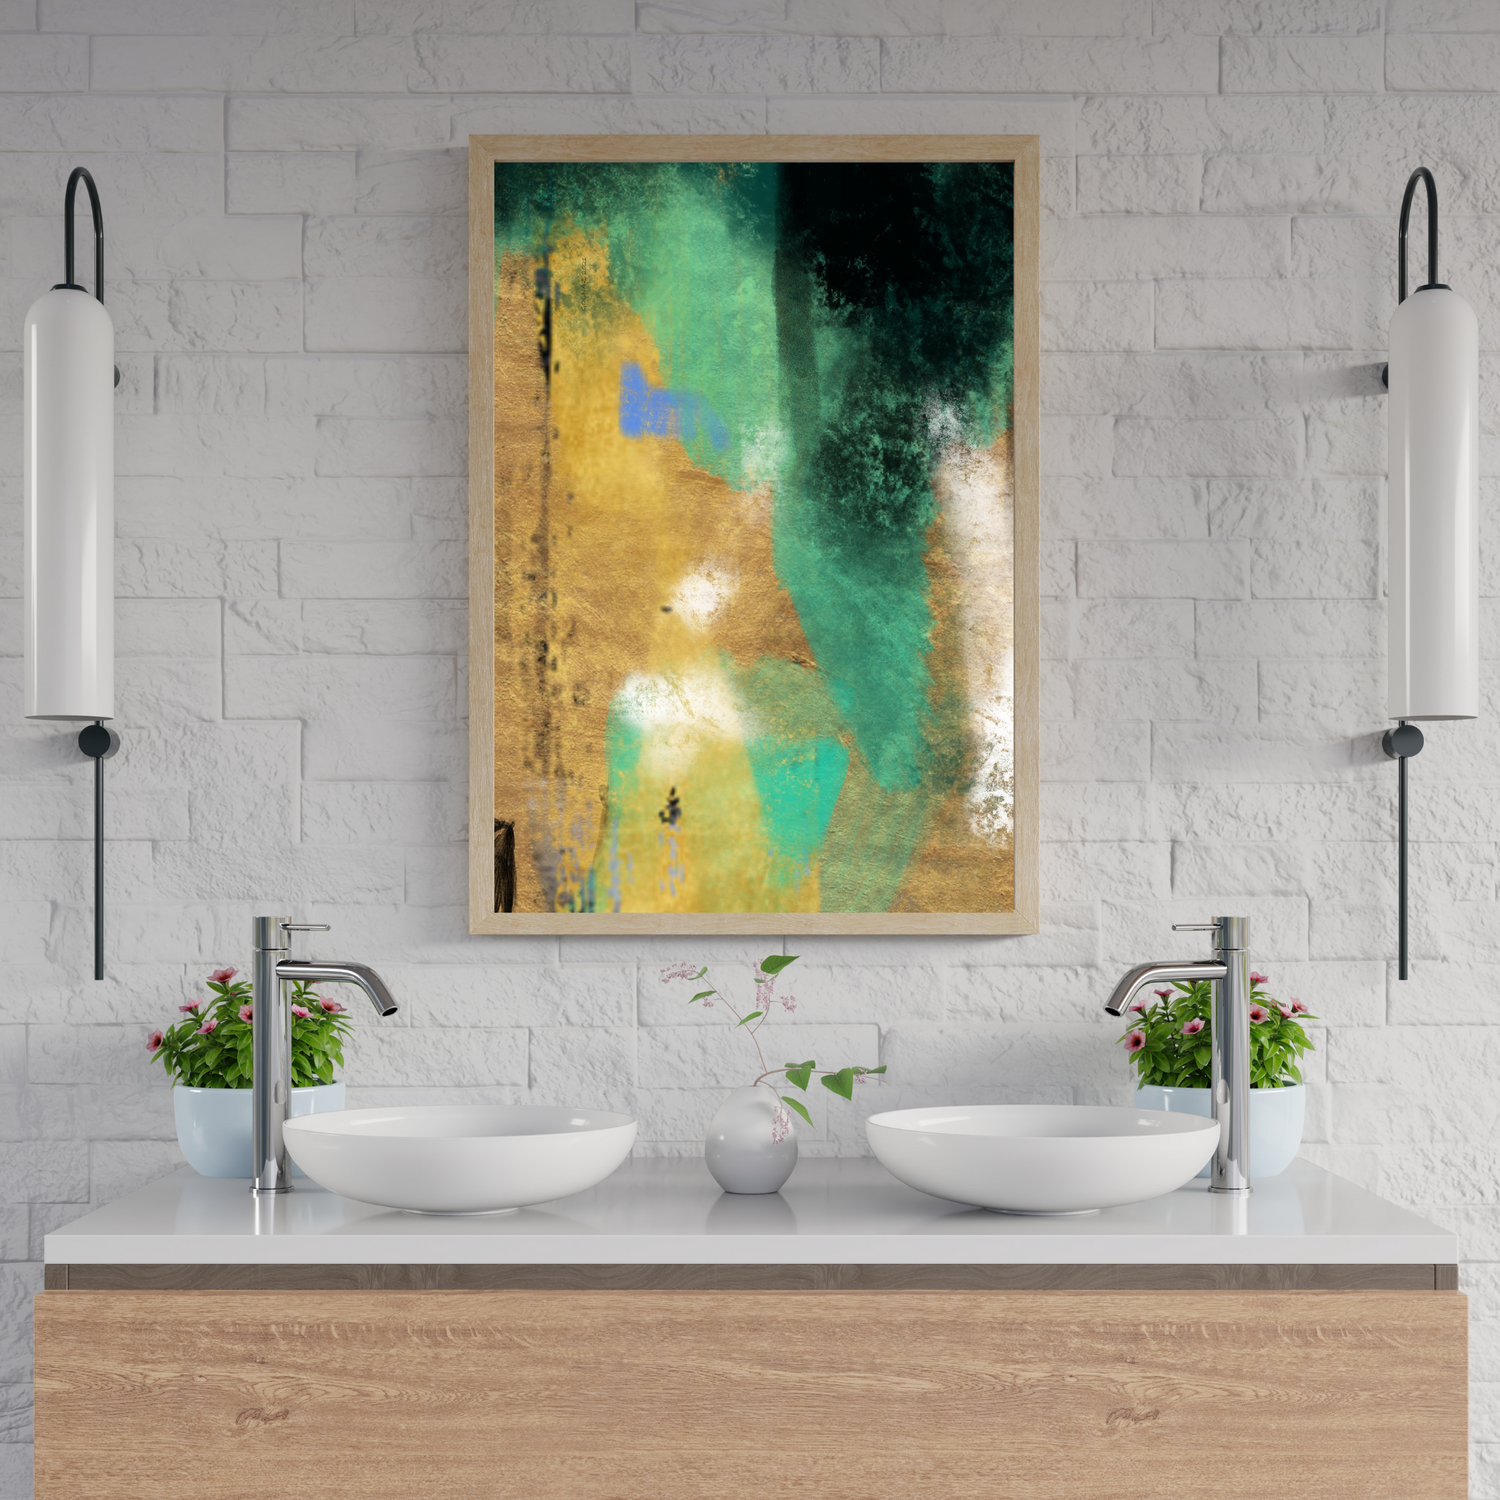 An example of the Blue Spot painting by ArisaTeam in a bathroom